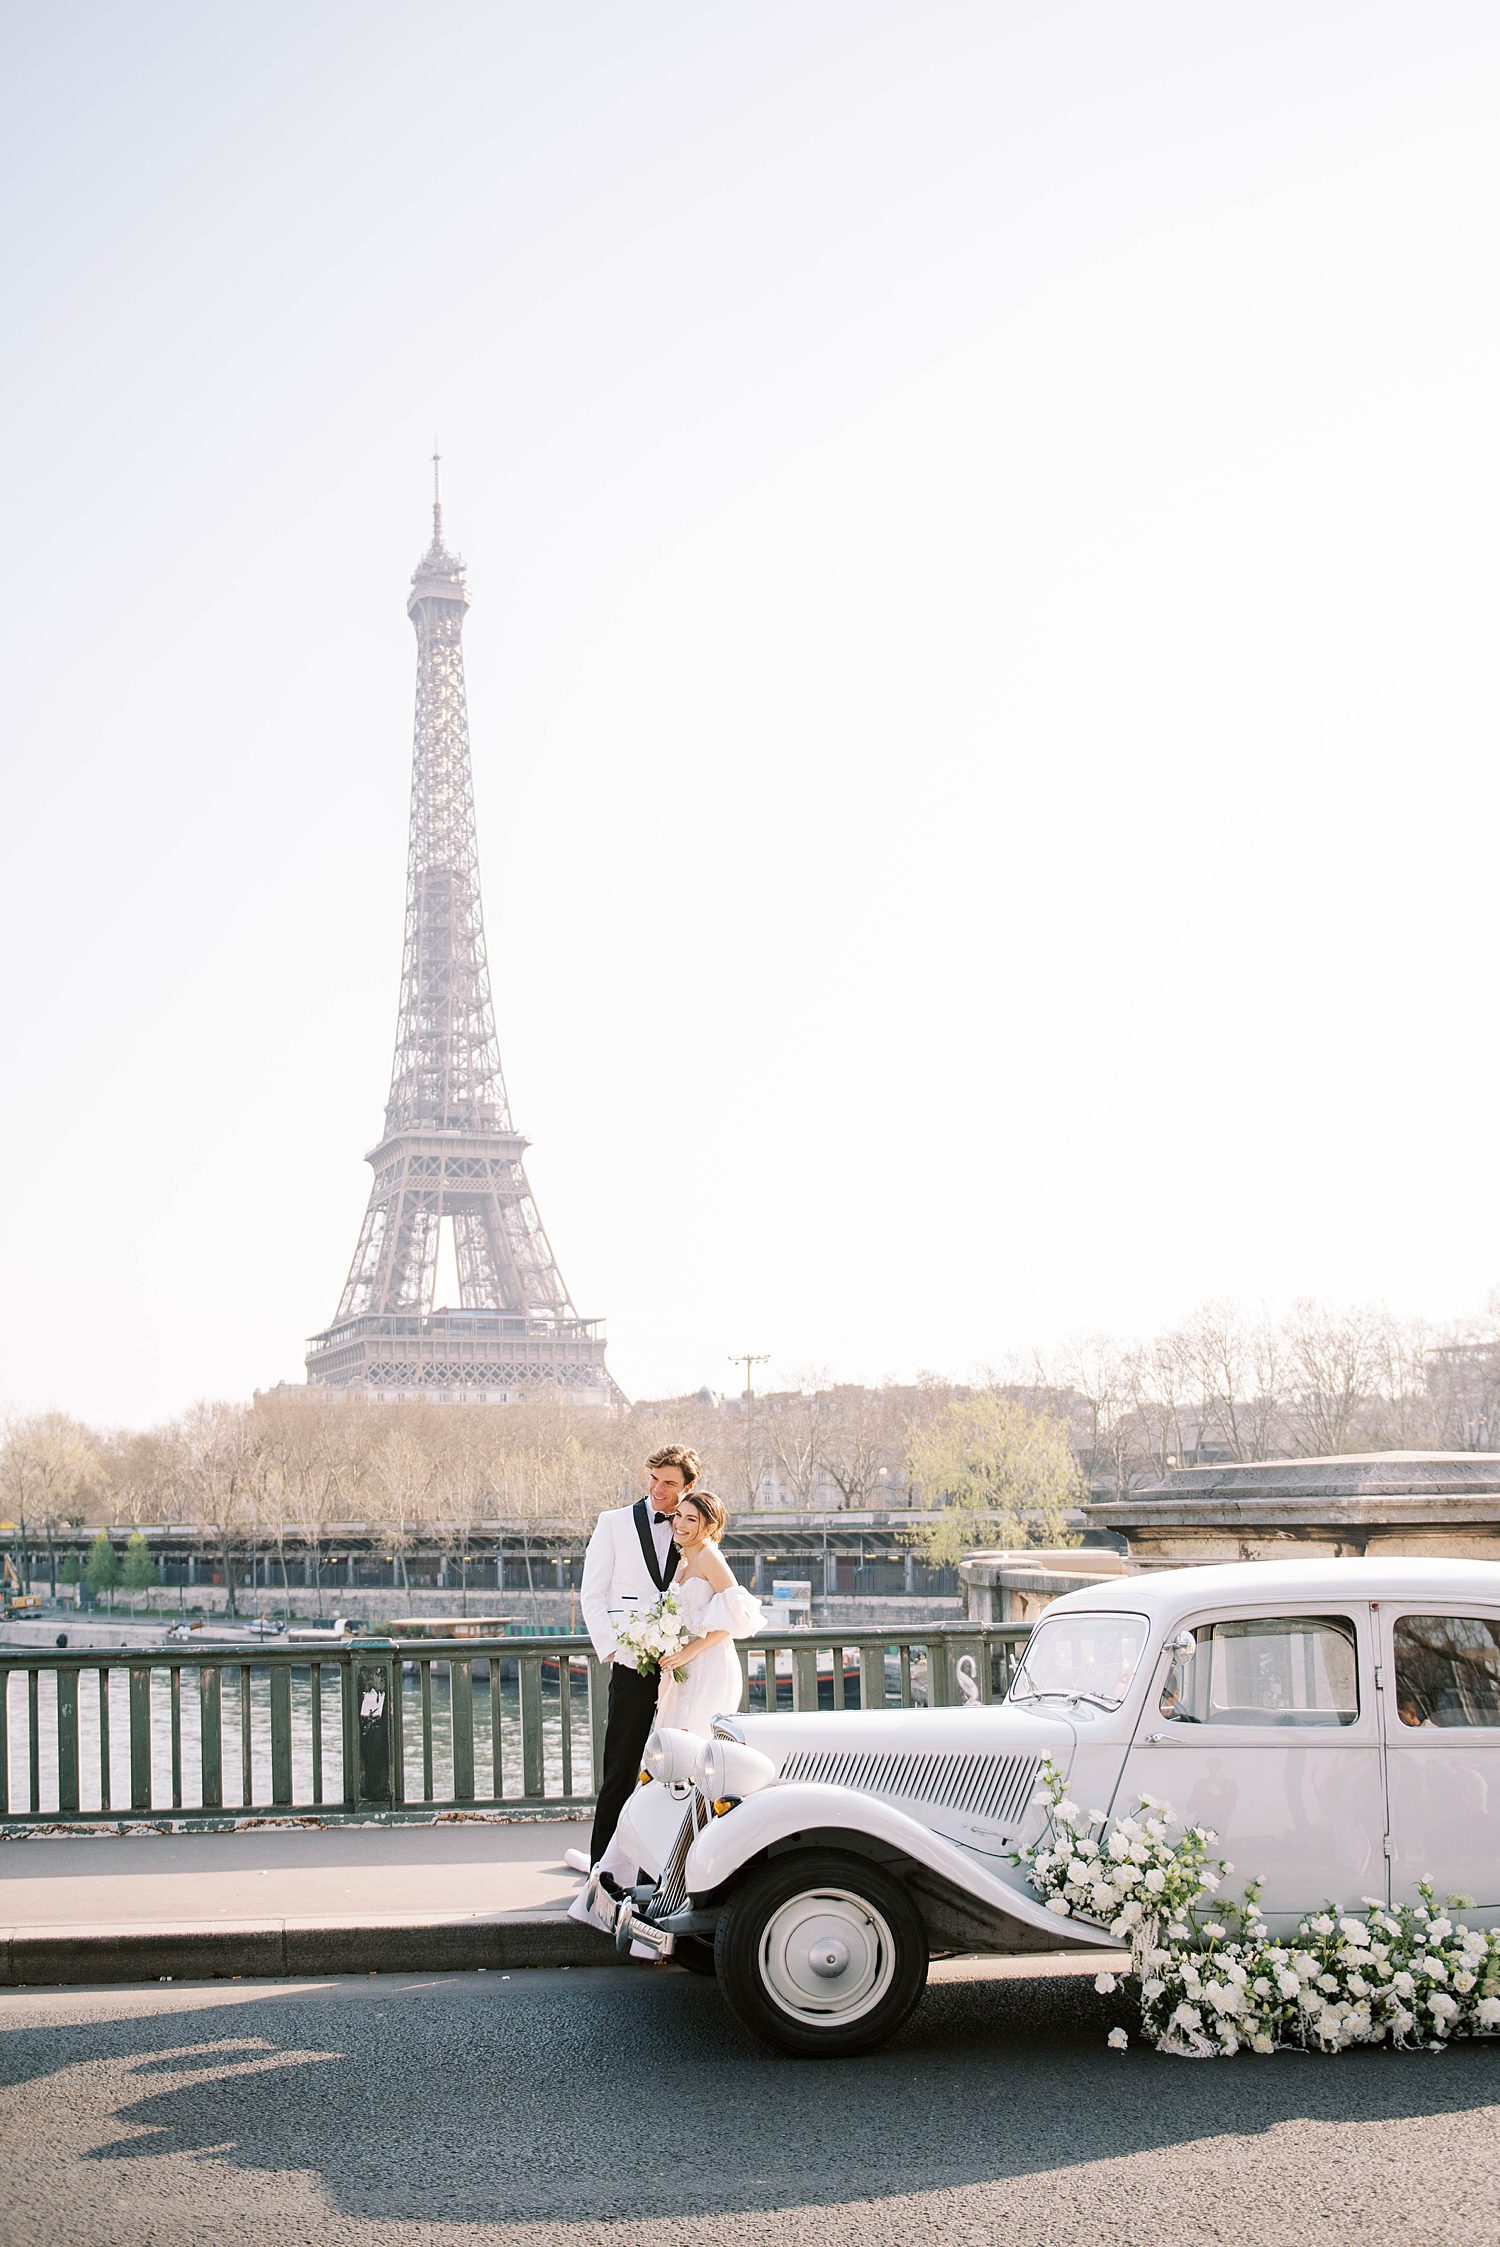 Inspiration for a romantic Paris wedding day shared by Paris wedding photographer Ruth Terrero Photography